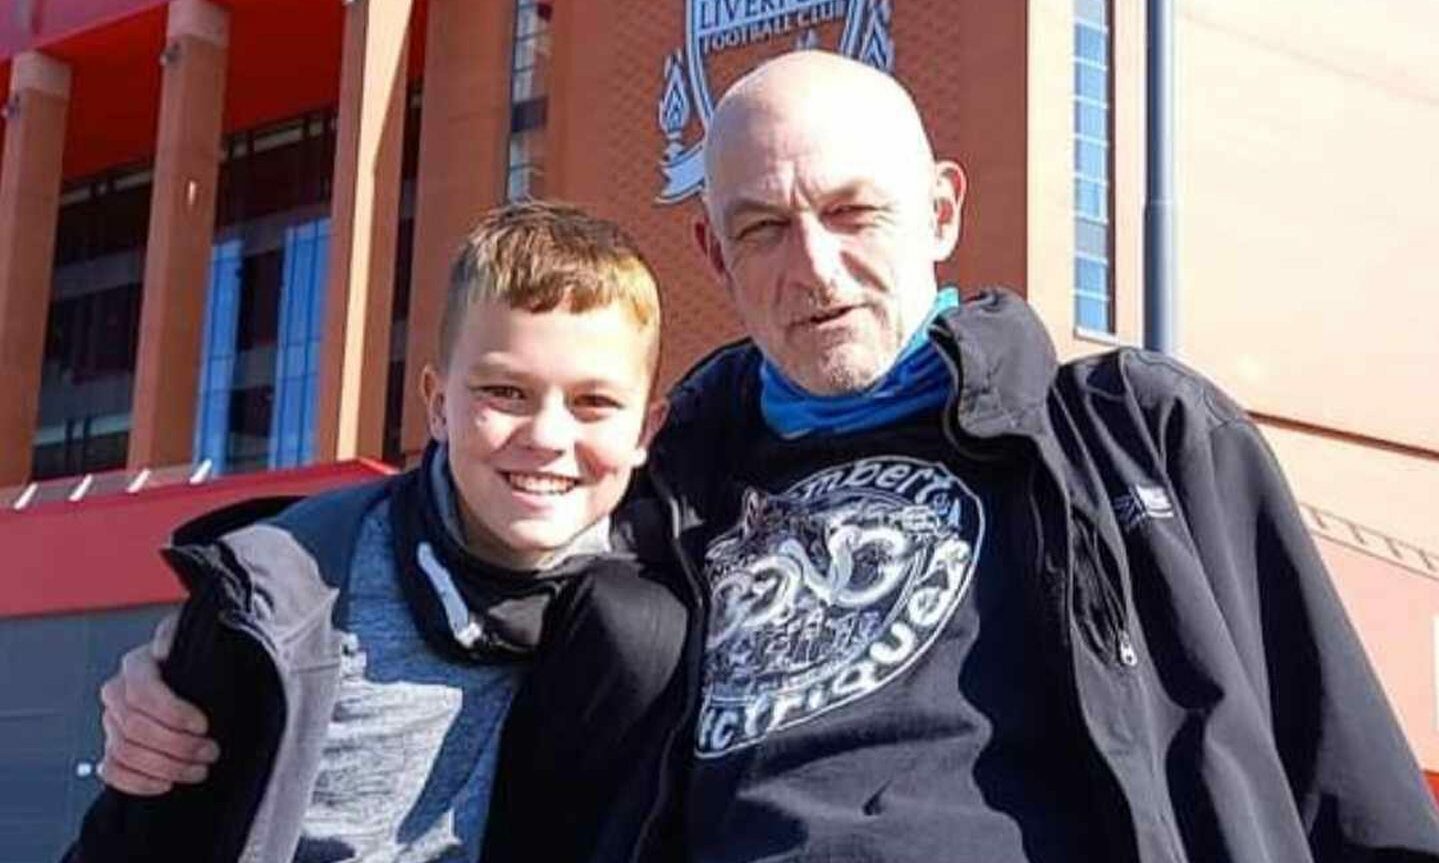 Dundee dad Jay Cannell with son James outside Anfield in Liverpool